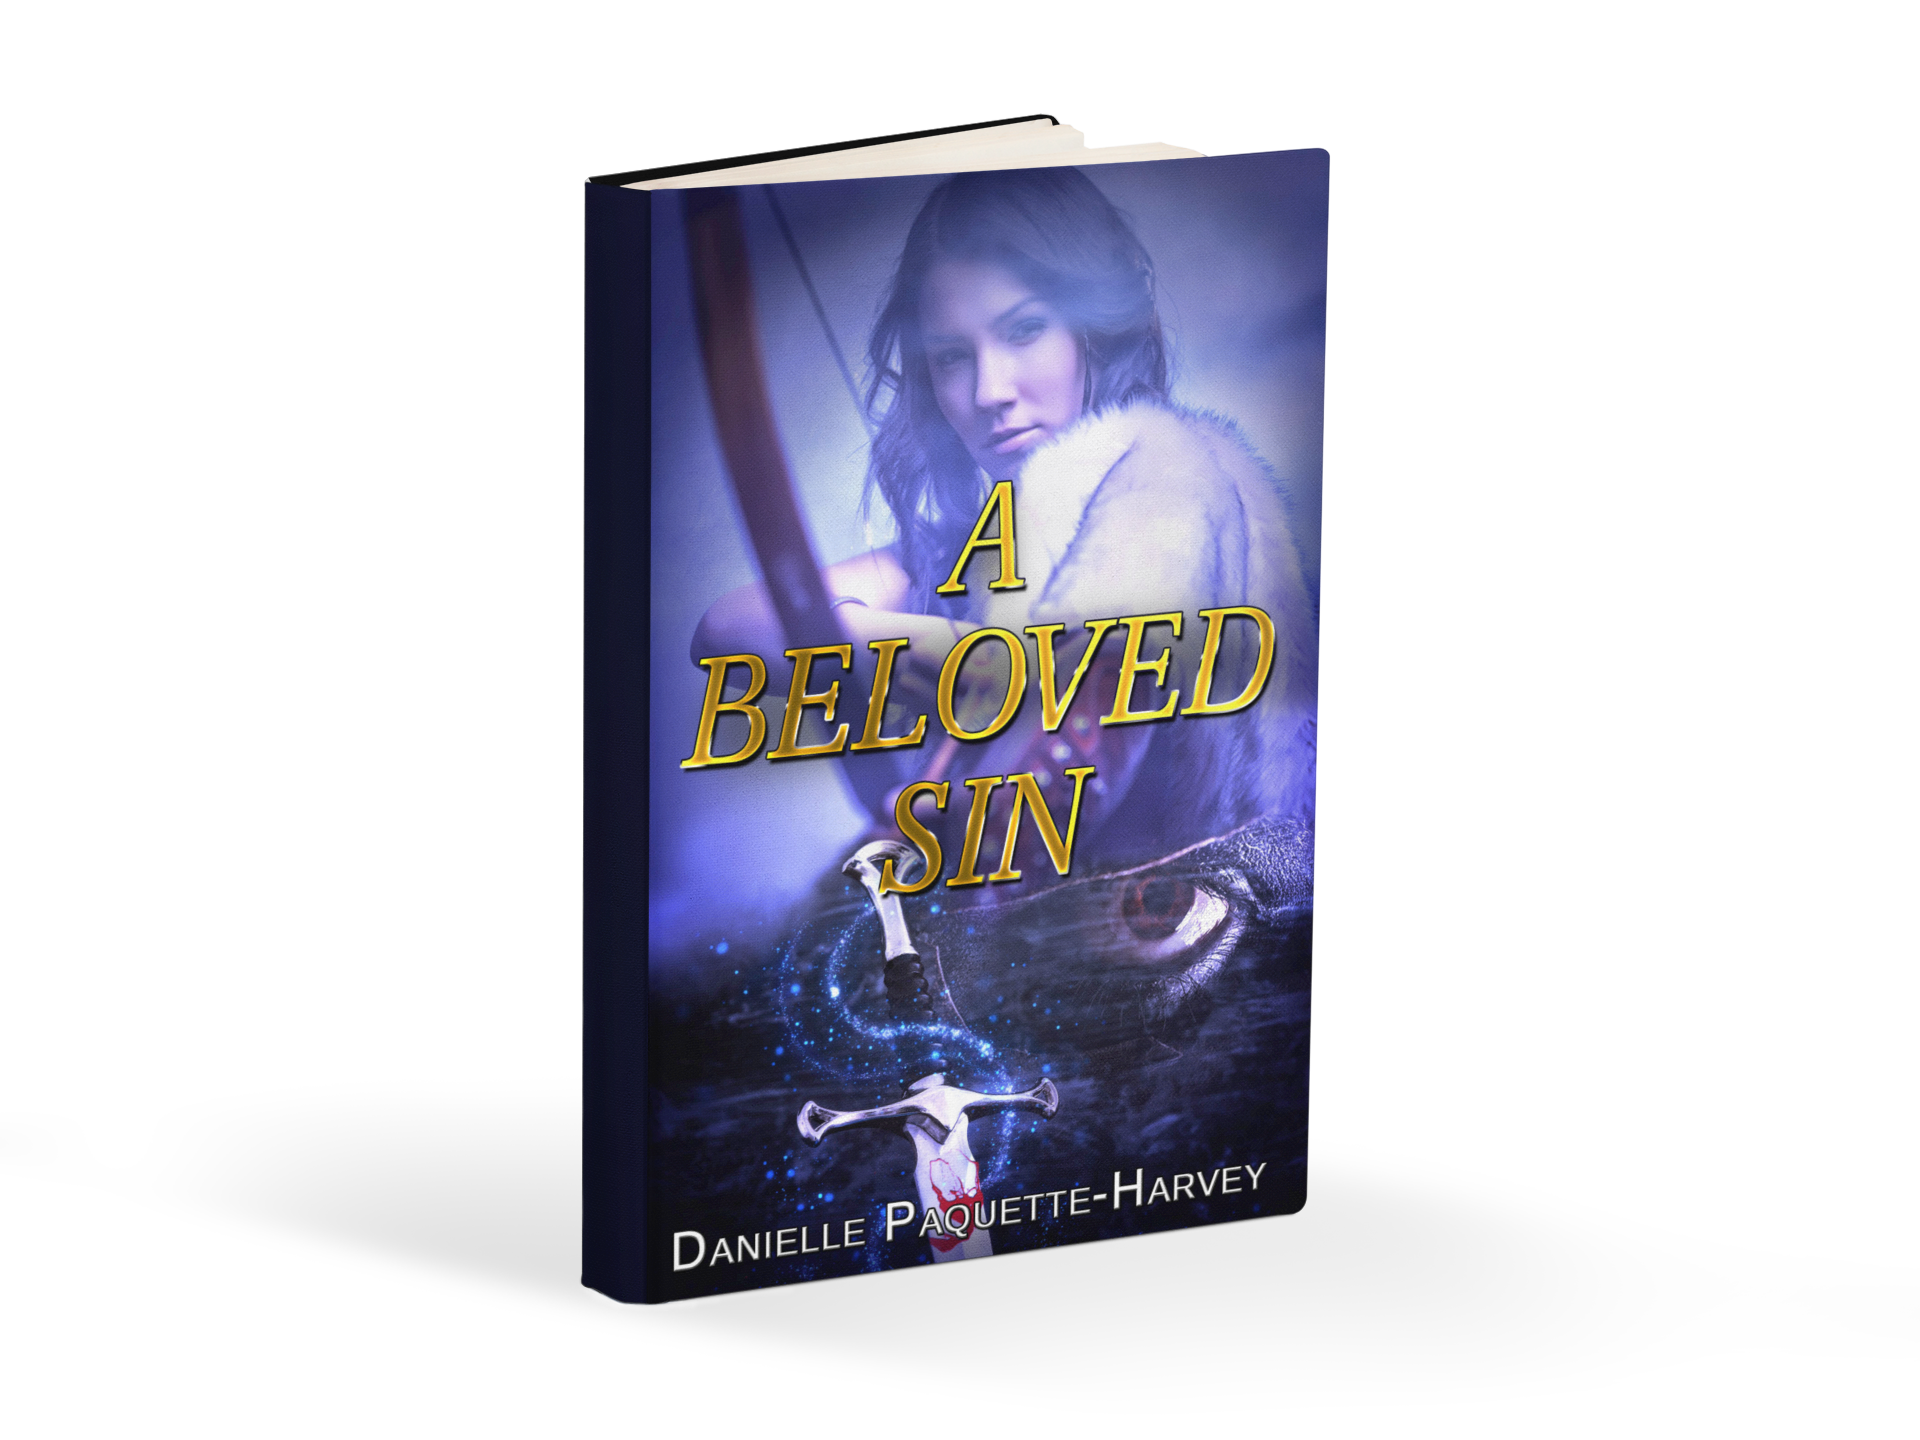 Danielle Paquette-Harvey’s A Beloved Sin offers readers a sizzling paranormal romance filled with masterful twists and turns